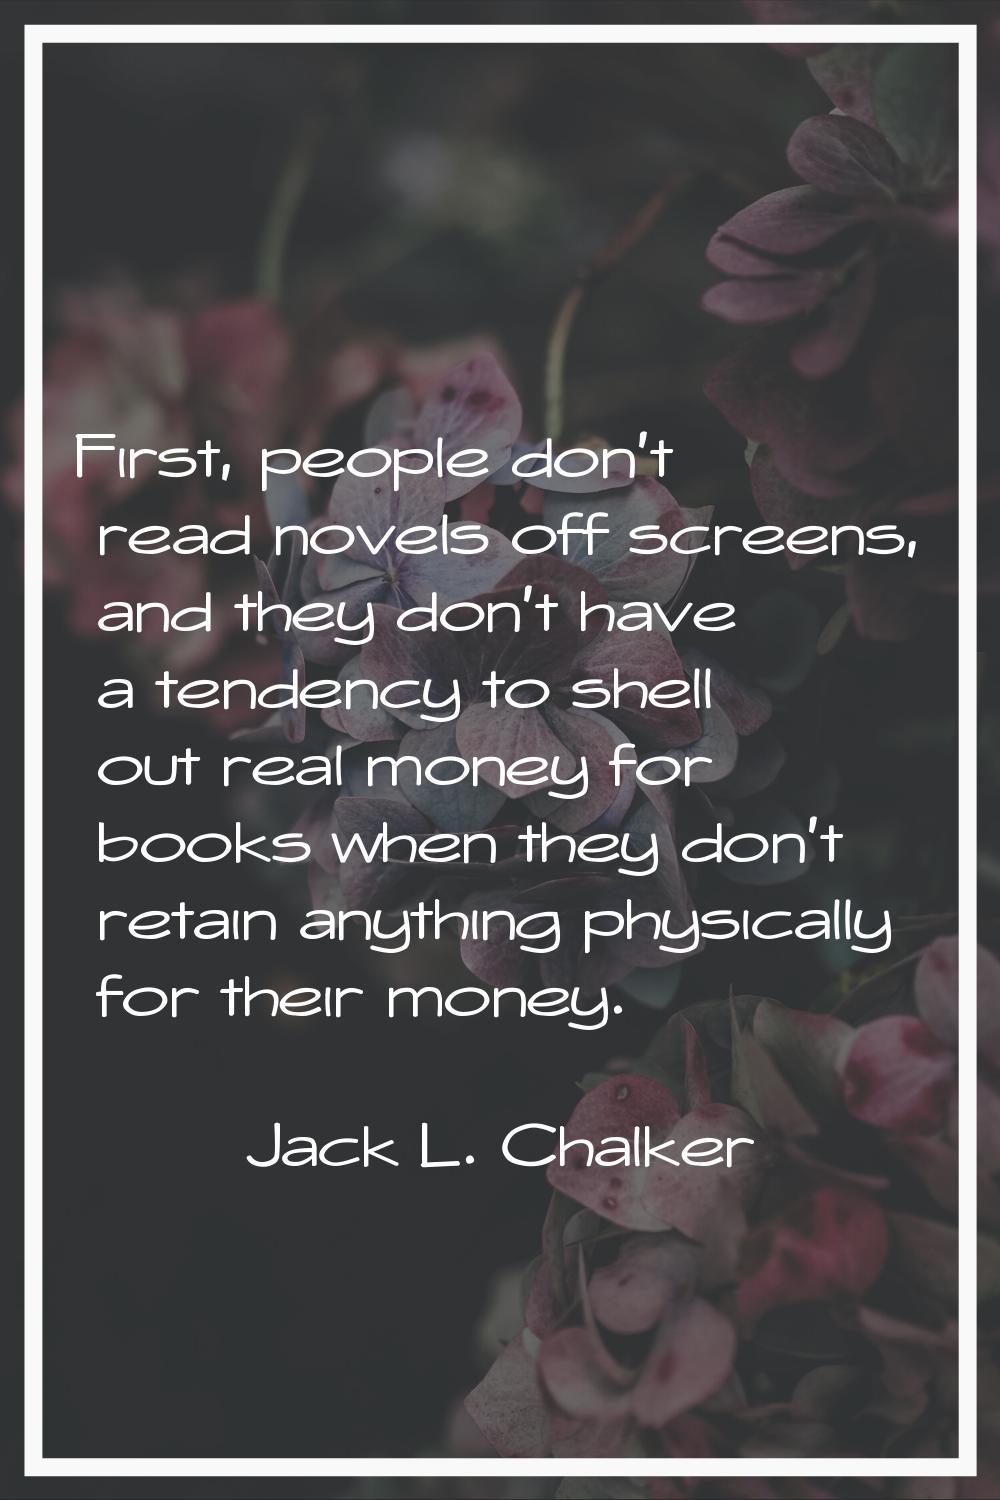 First, people don't read novels off screens, and they don't have a tendency to shell out real money